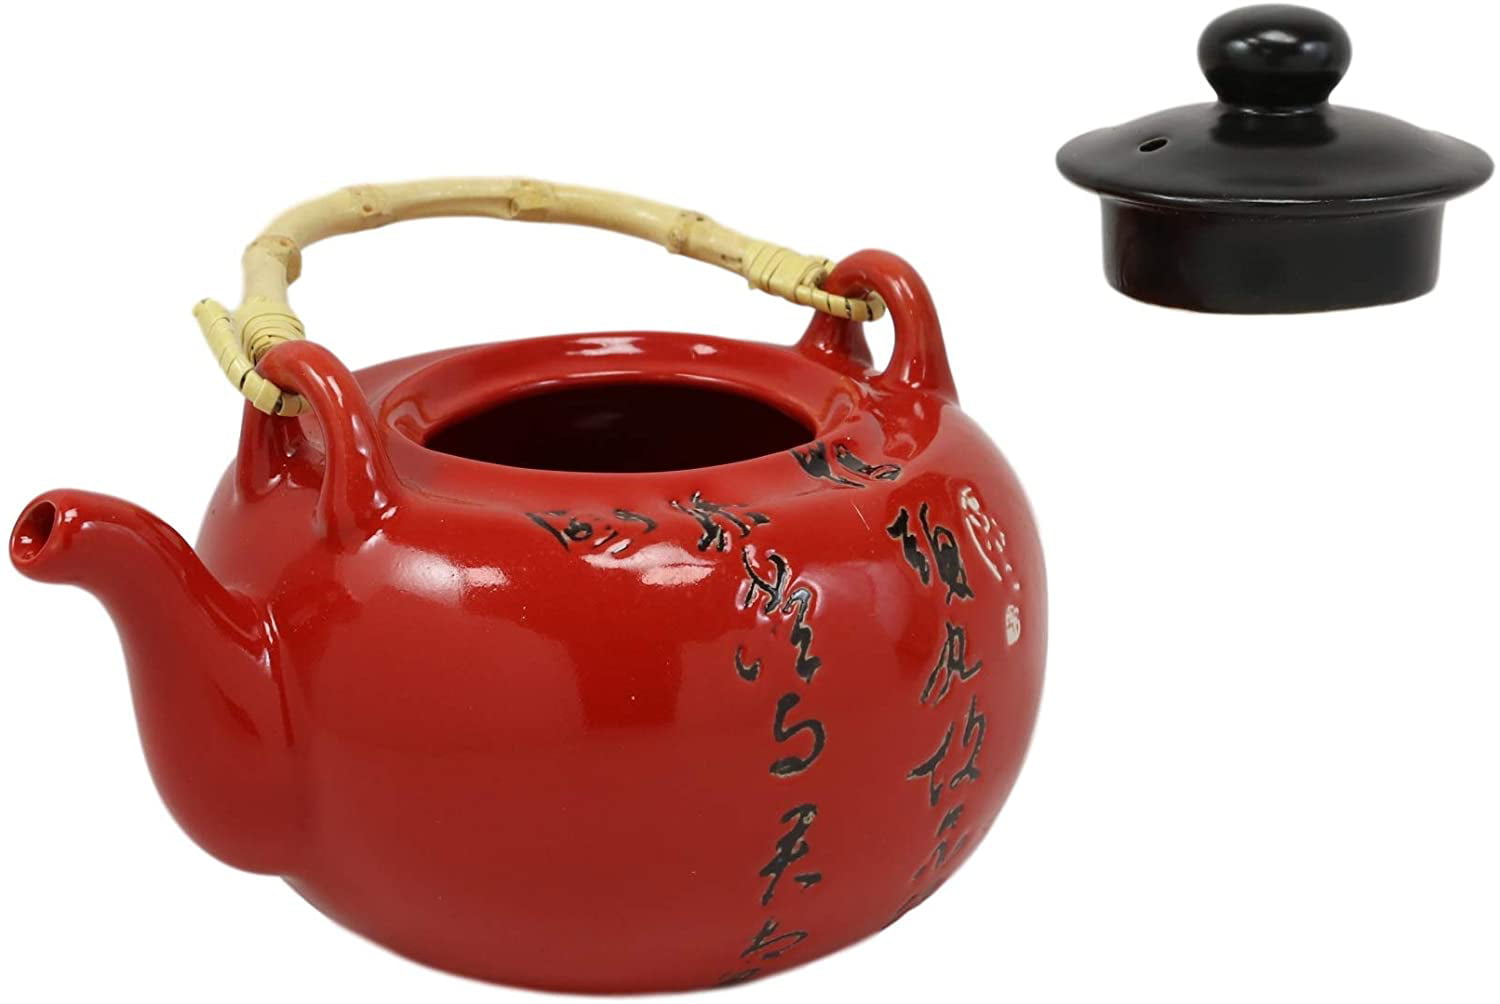 Dropship Large Porcelain Teapot Red 900ml (3-4 Cups) Stainless